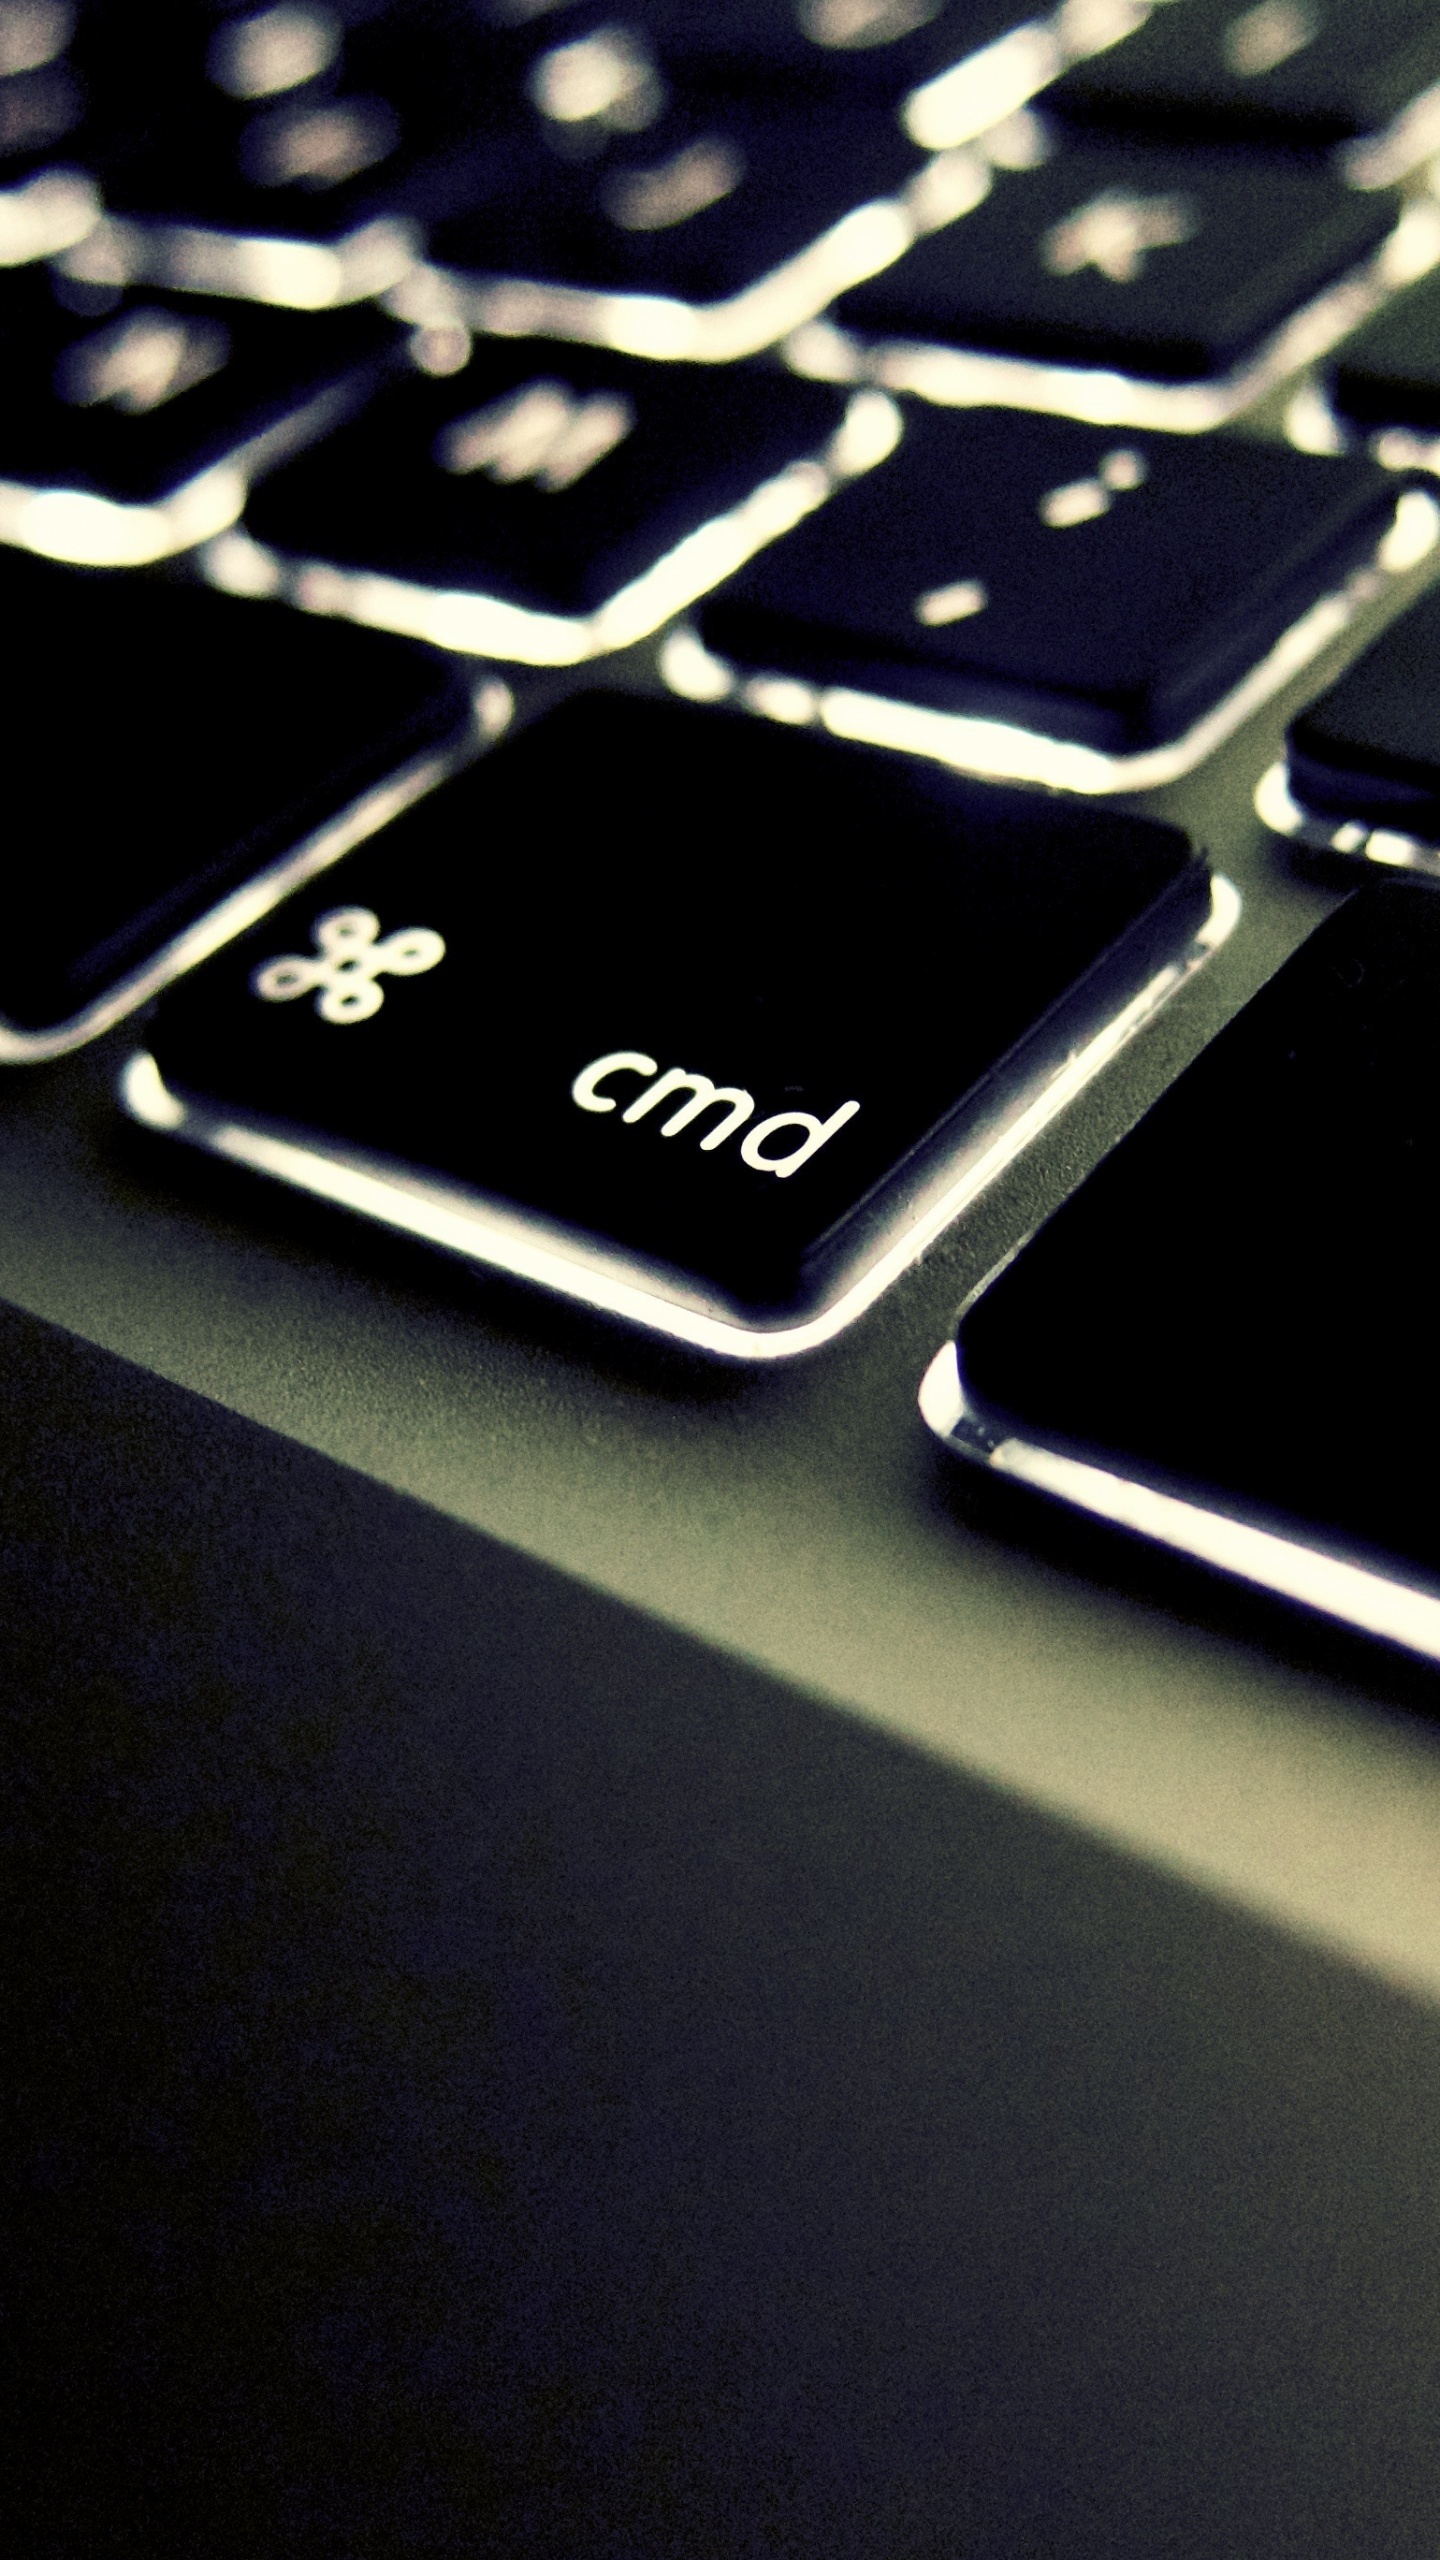 Input Device, Technology, Electronic Device, Space Bar, High Tech. Wallpaper in 1440x2560 Resolution